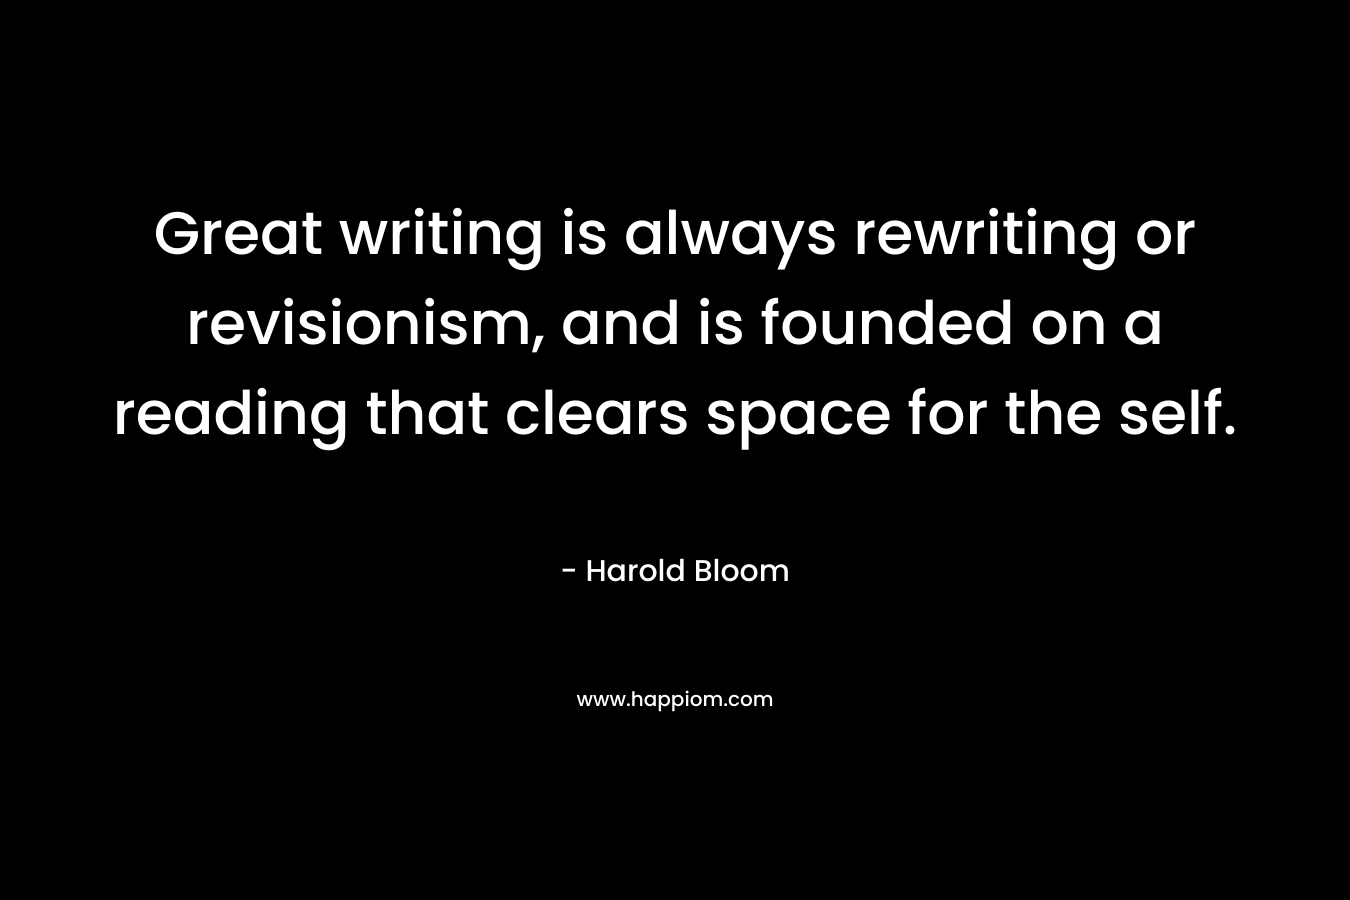 Great writing is always rewriting or revisionism, and is founded on a reading that clears space for the self. – Harold Bloom